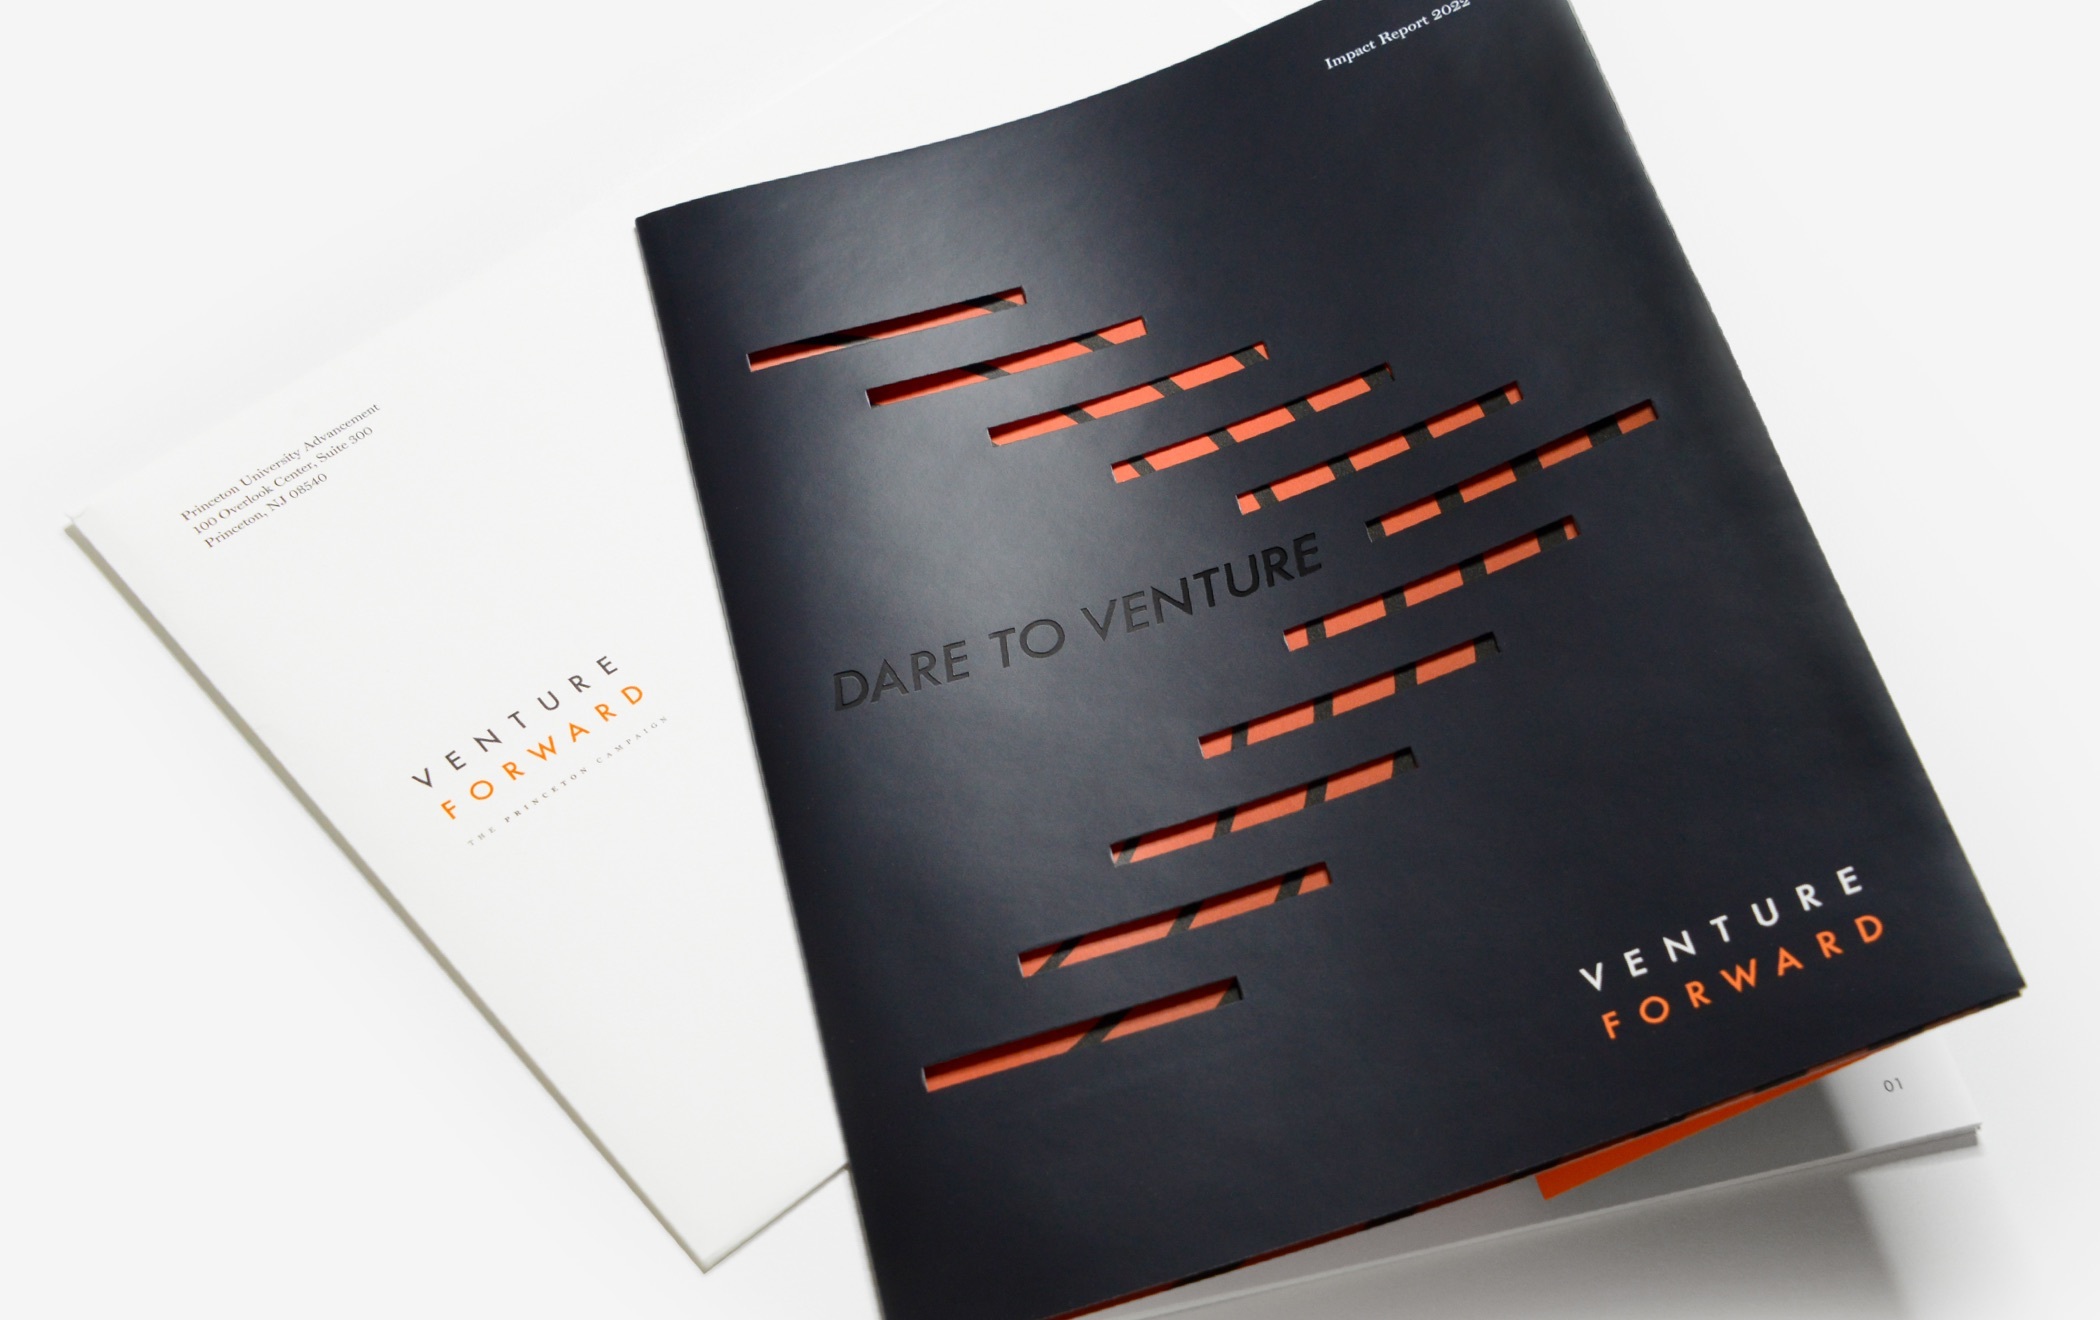 The front and back of the Princeton Venture Forward campaign brochure. The front is black with cut outs in the shape of a chevron revealing an orange page underneath. The center reads “Dare to Venture” and the bottom right corner reads “Venture Forward.” The back of the brochure is white with gray and orange text that reads “Venture Forward.”